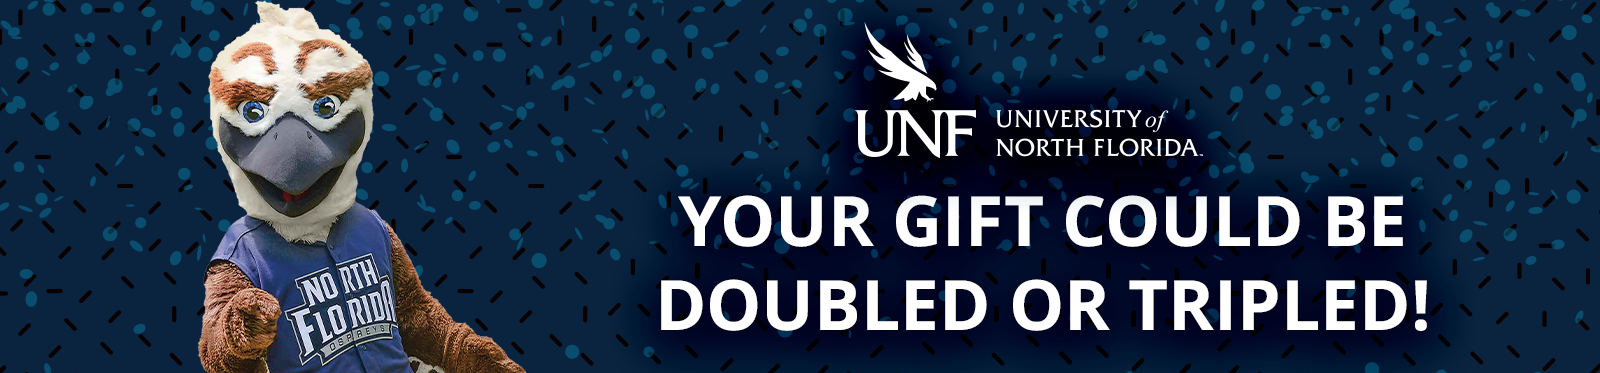 Osprey mascot celebrating next to the UNF logo text of your gift could be doubled or tripled!